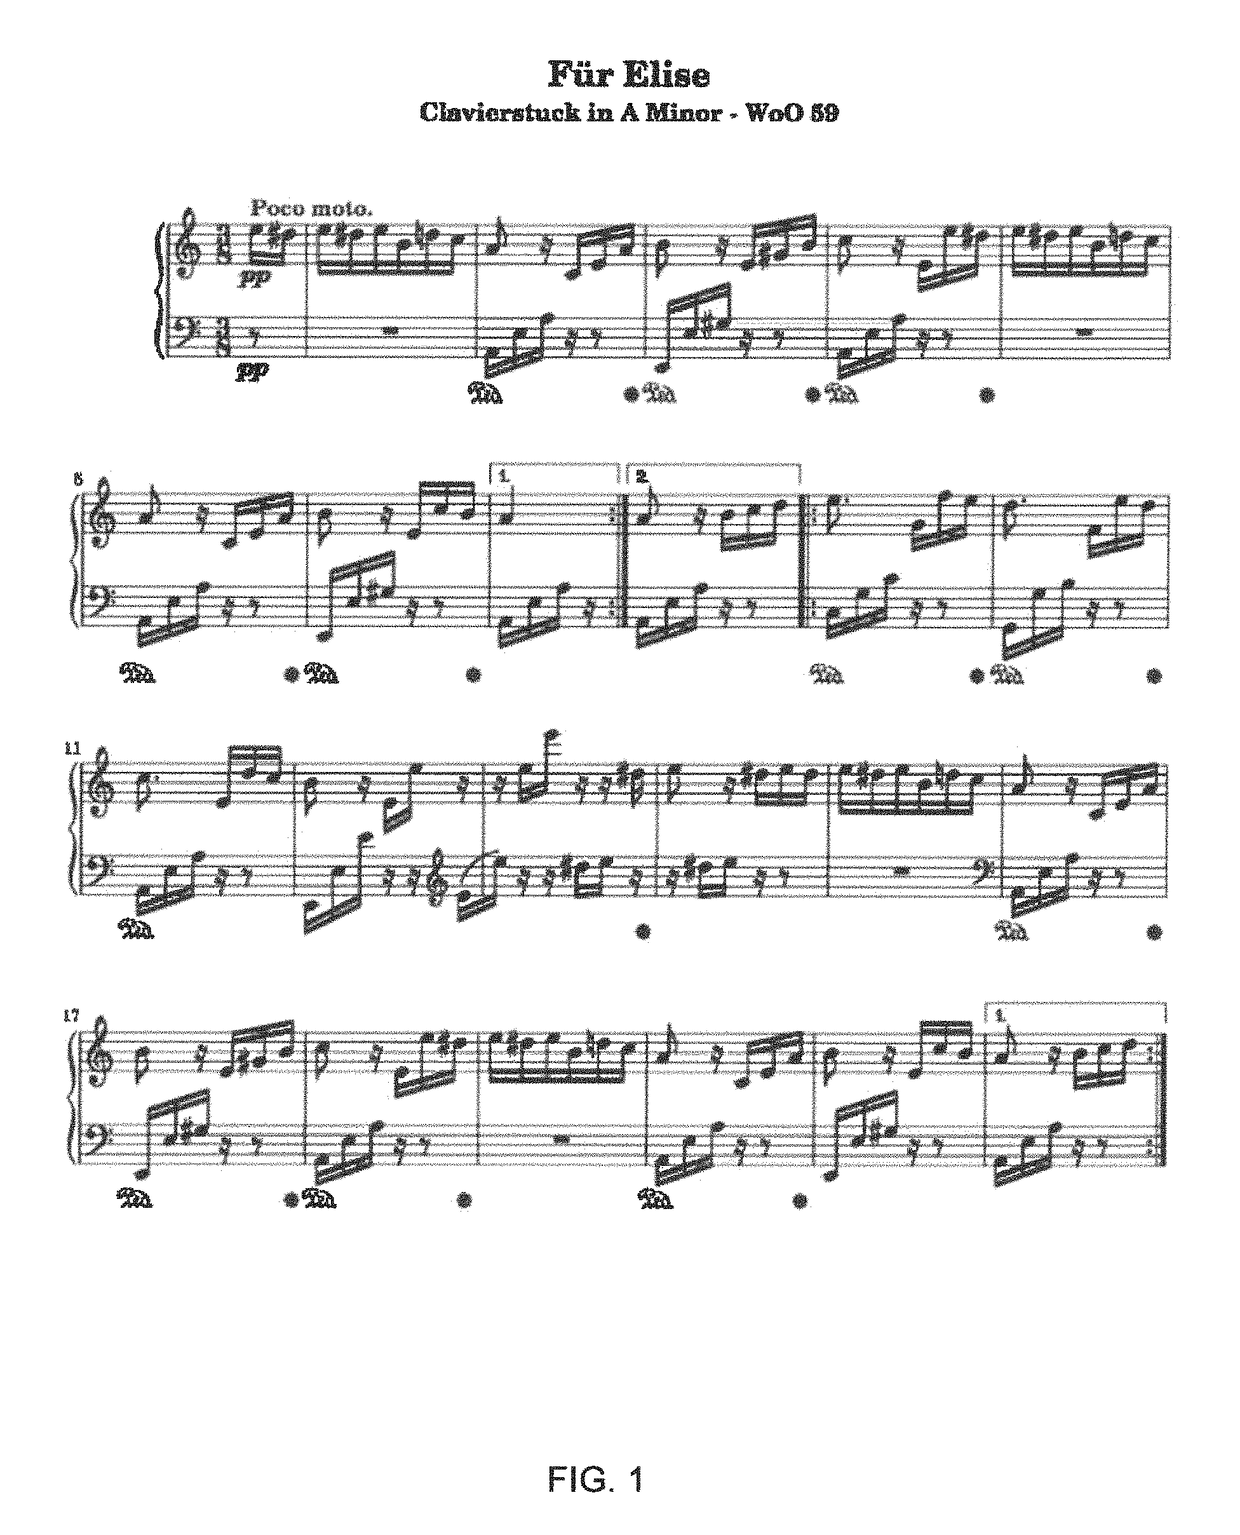 Musical notation system for piano